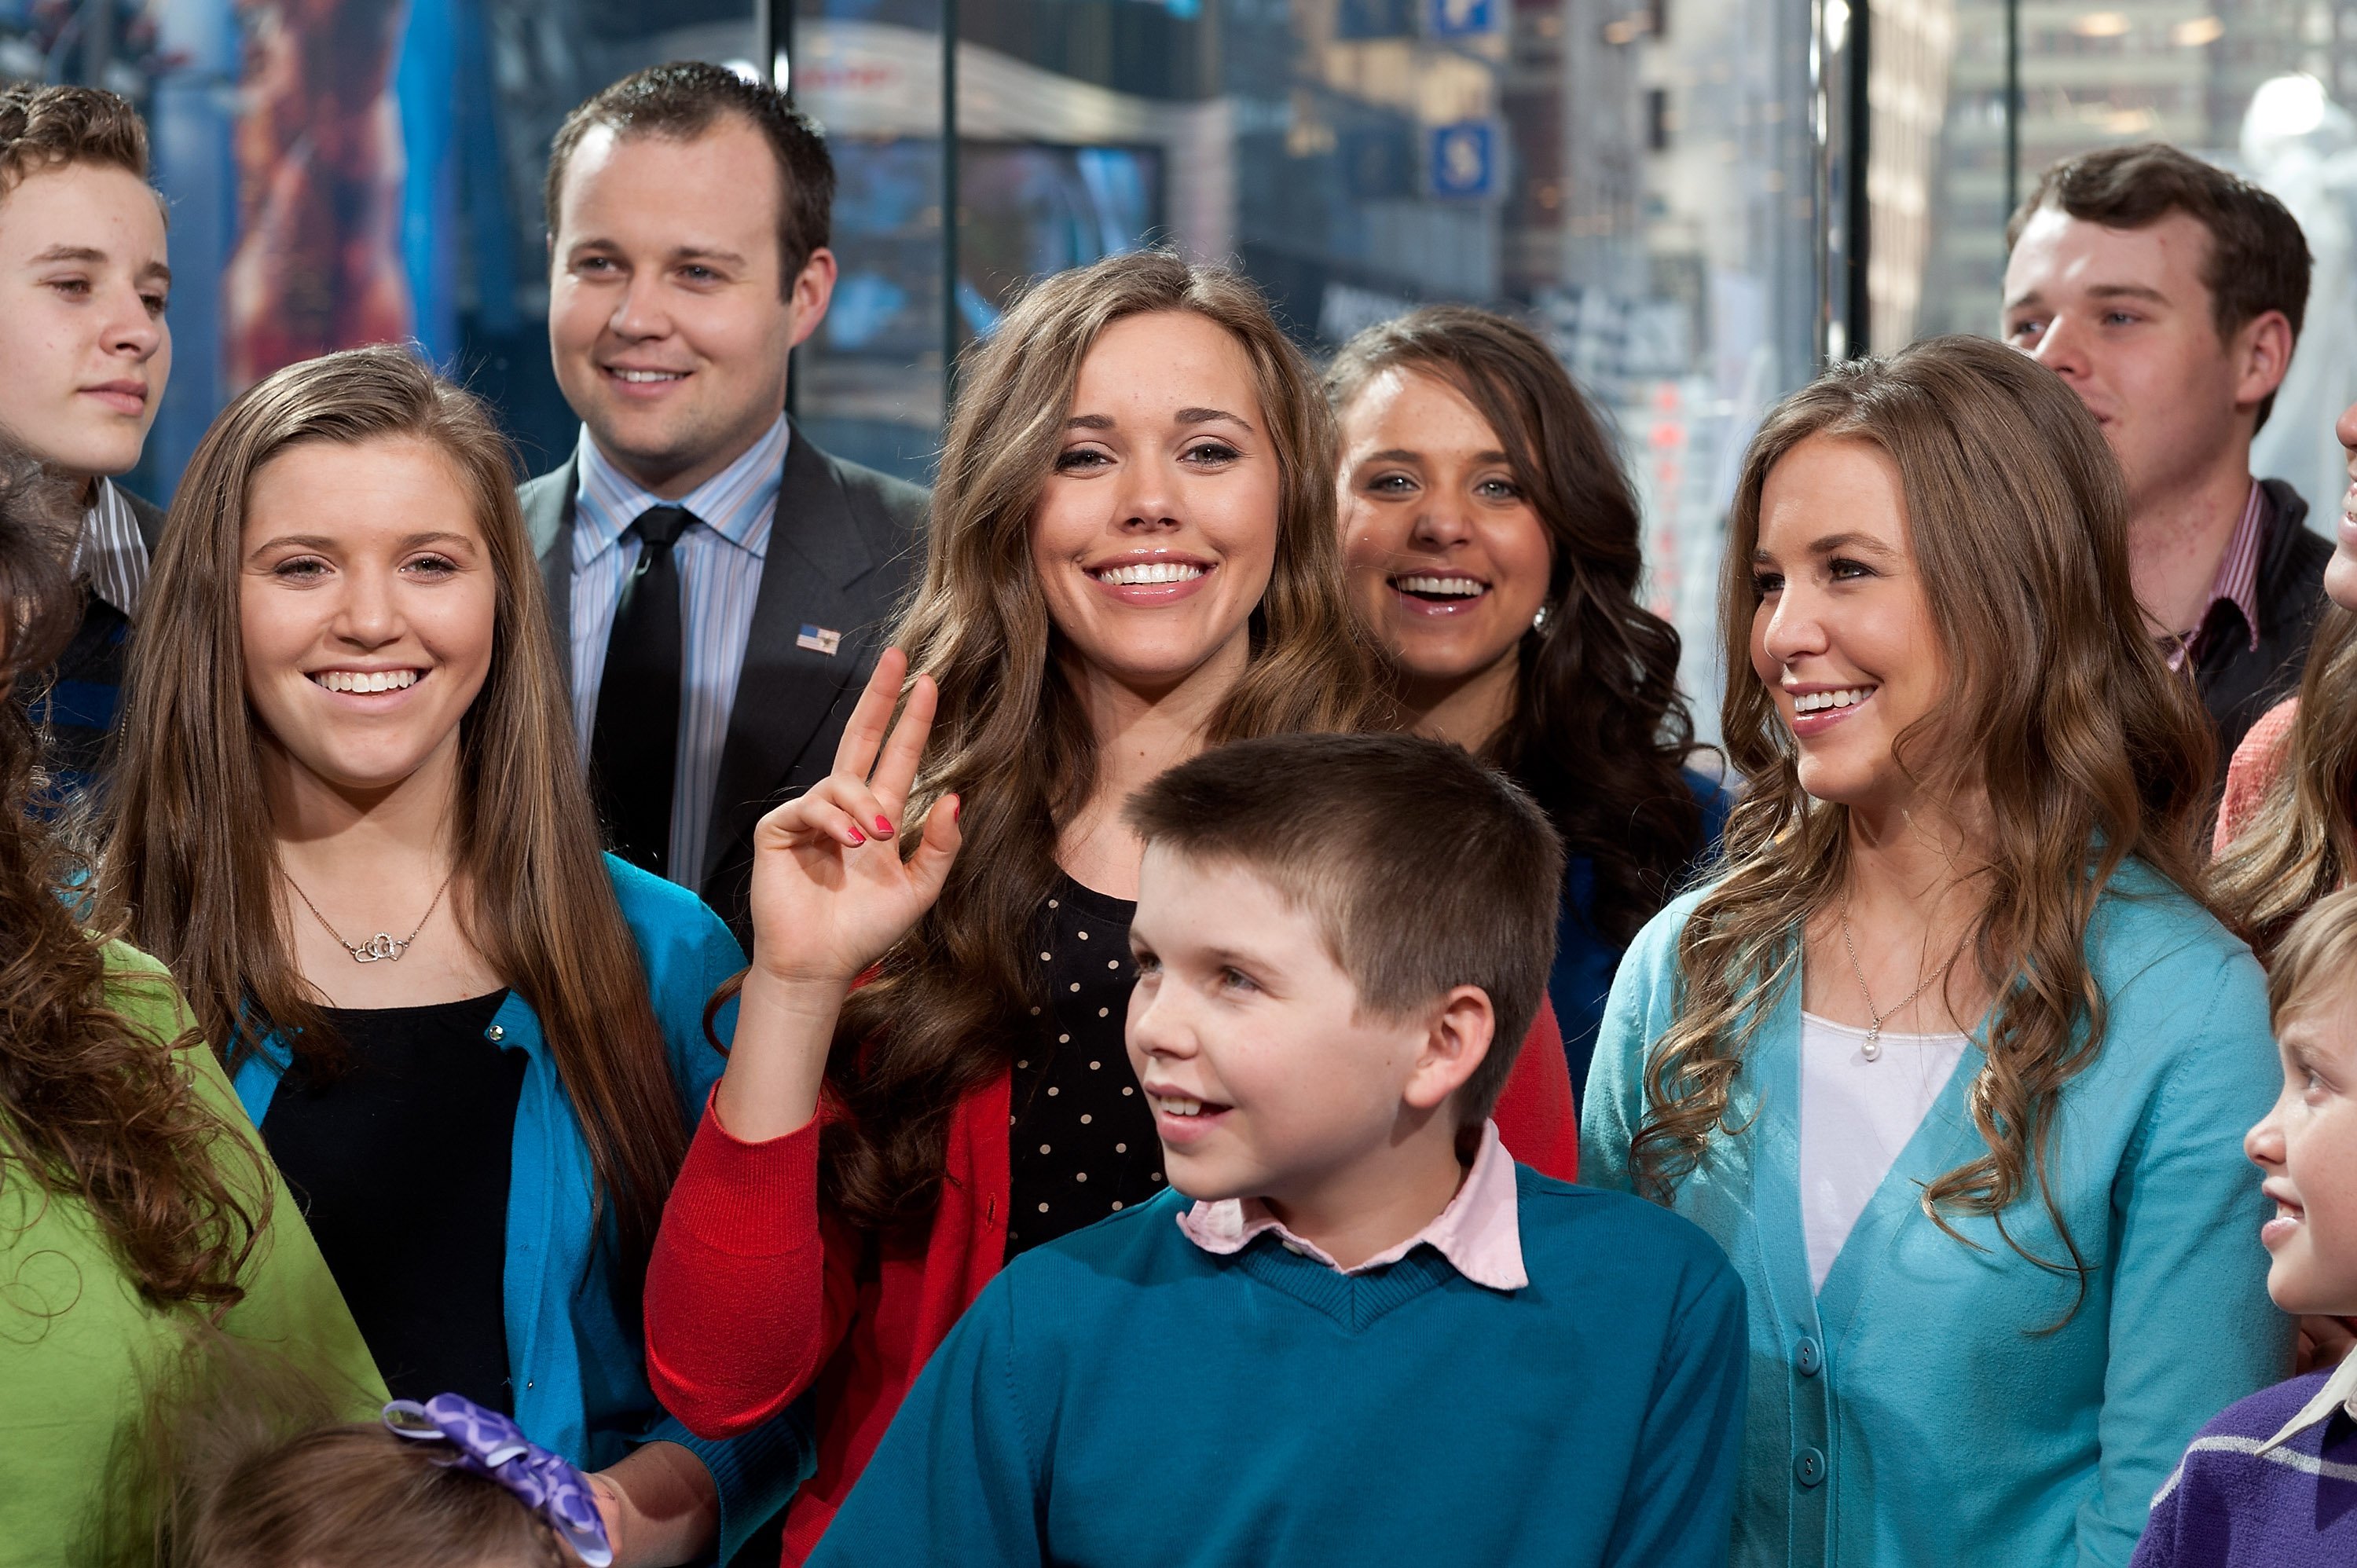 Jessa Duggar and the rest of the Duggar Family on March 11, 2014 in New York City | Photo: Getty Images